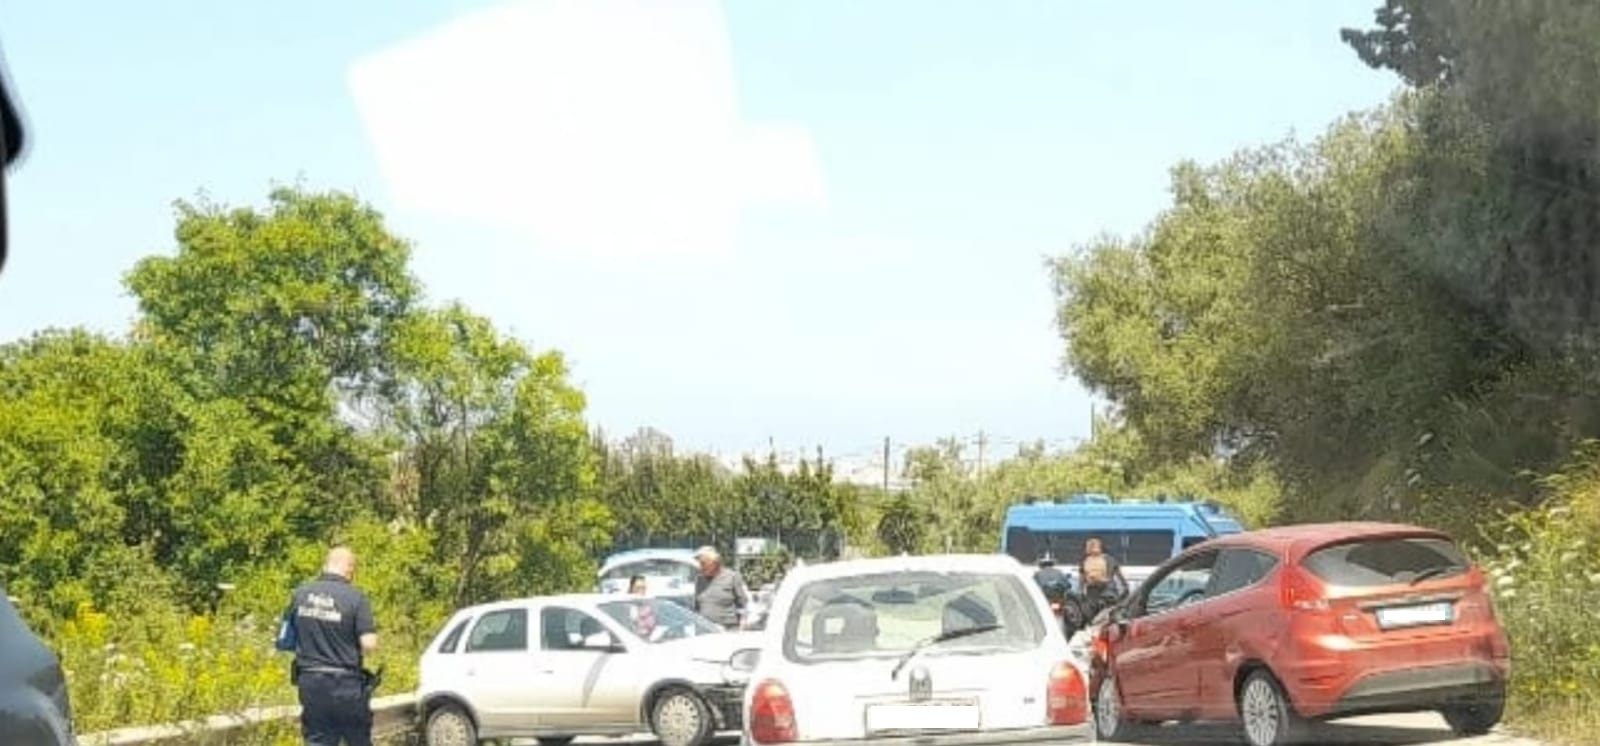 Siracusa – Scontro frontale tra due auto in bus Elorina